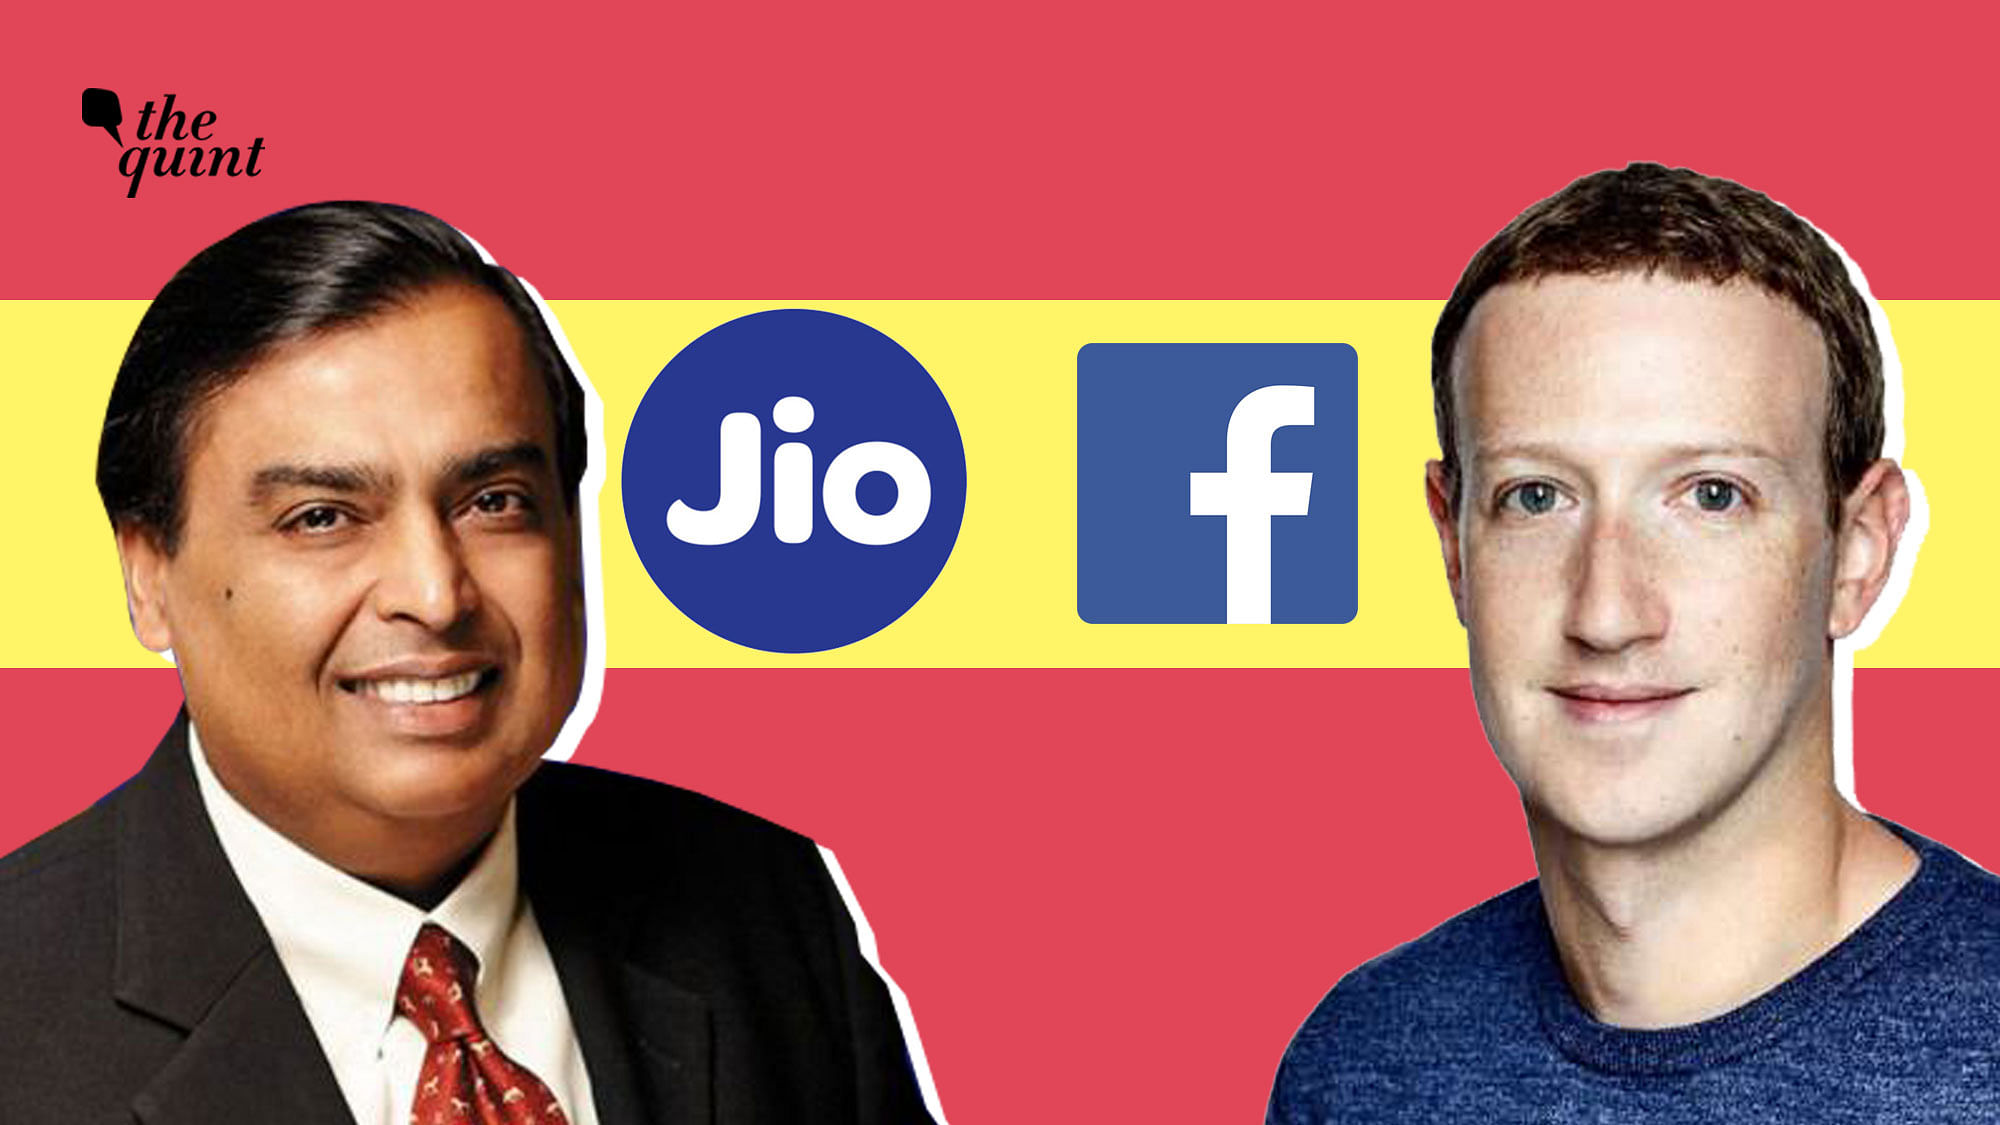 Facebook has bought a minority stake in Reliance Jio.